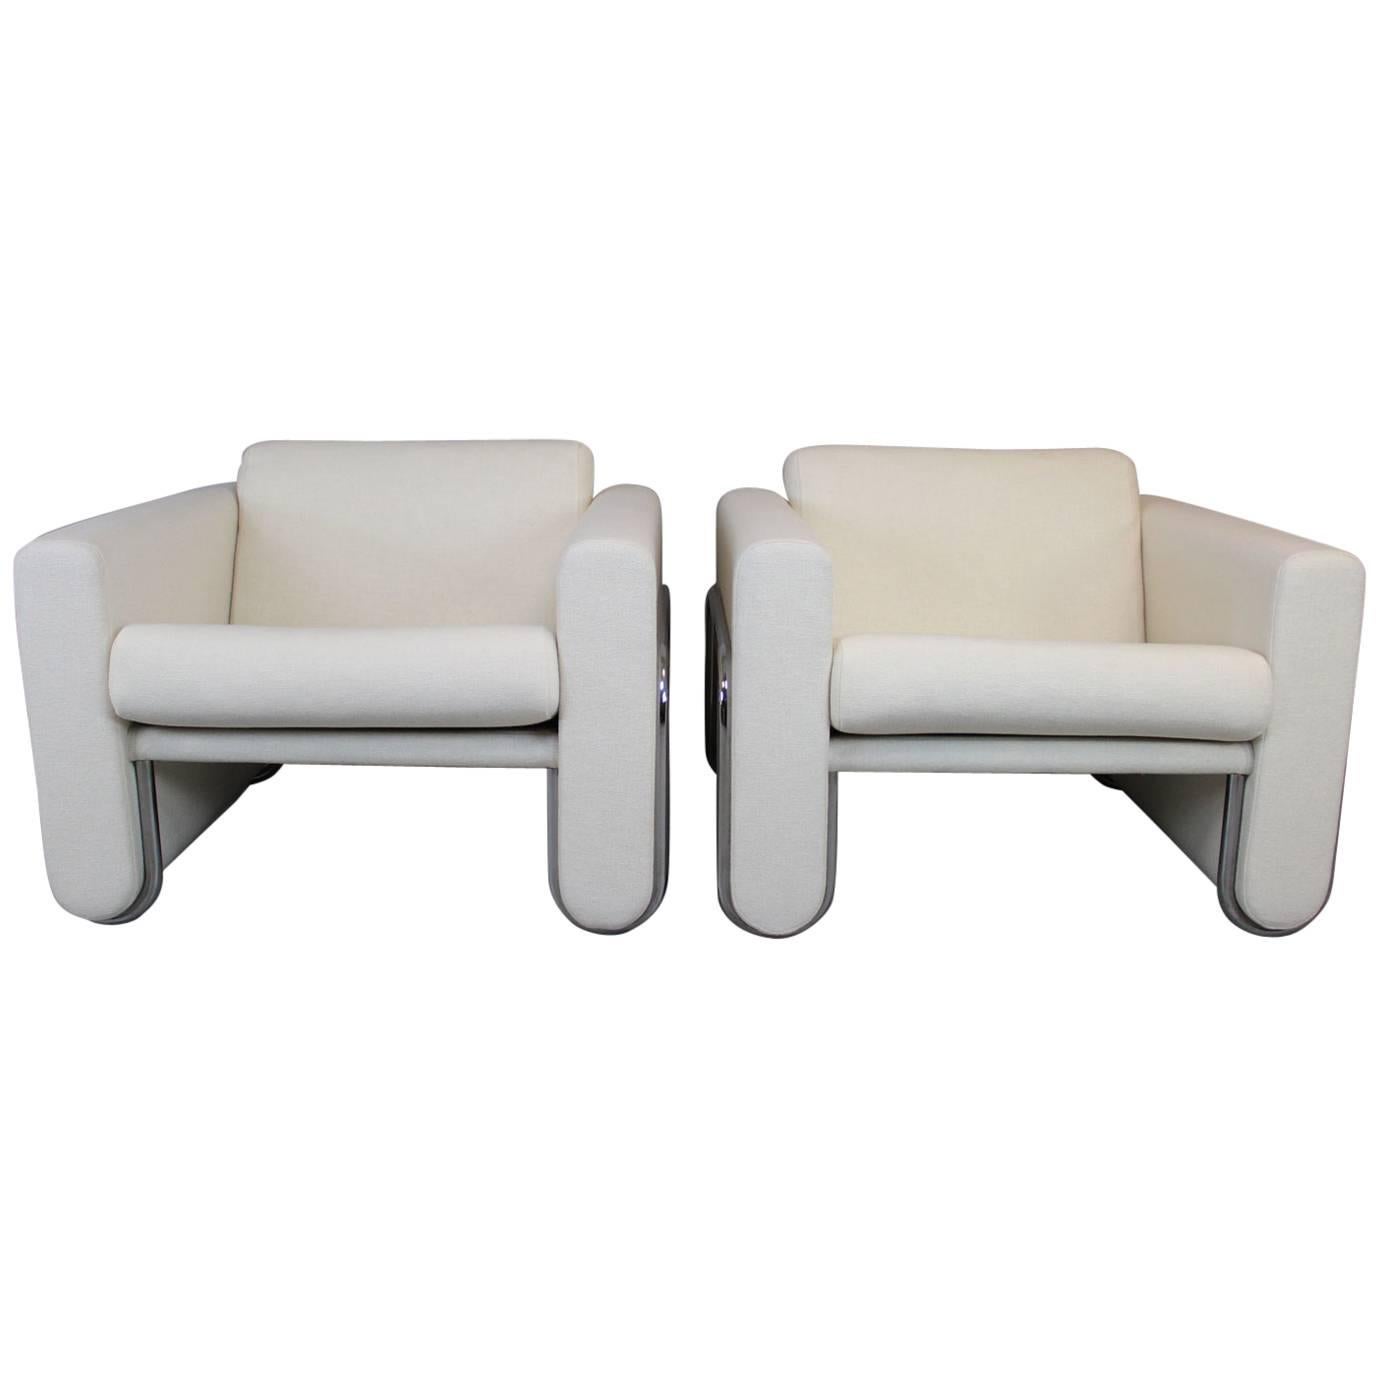 Lecorbusier Style White Club Chairs with Wrap around Stainless Steel Frame